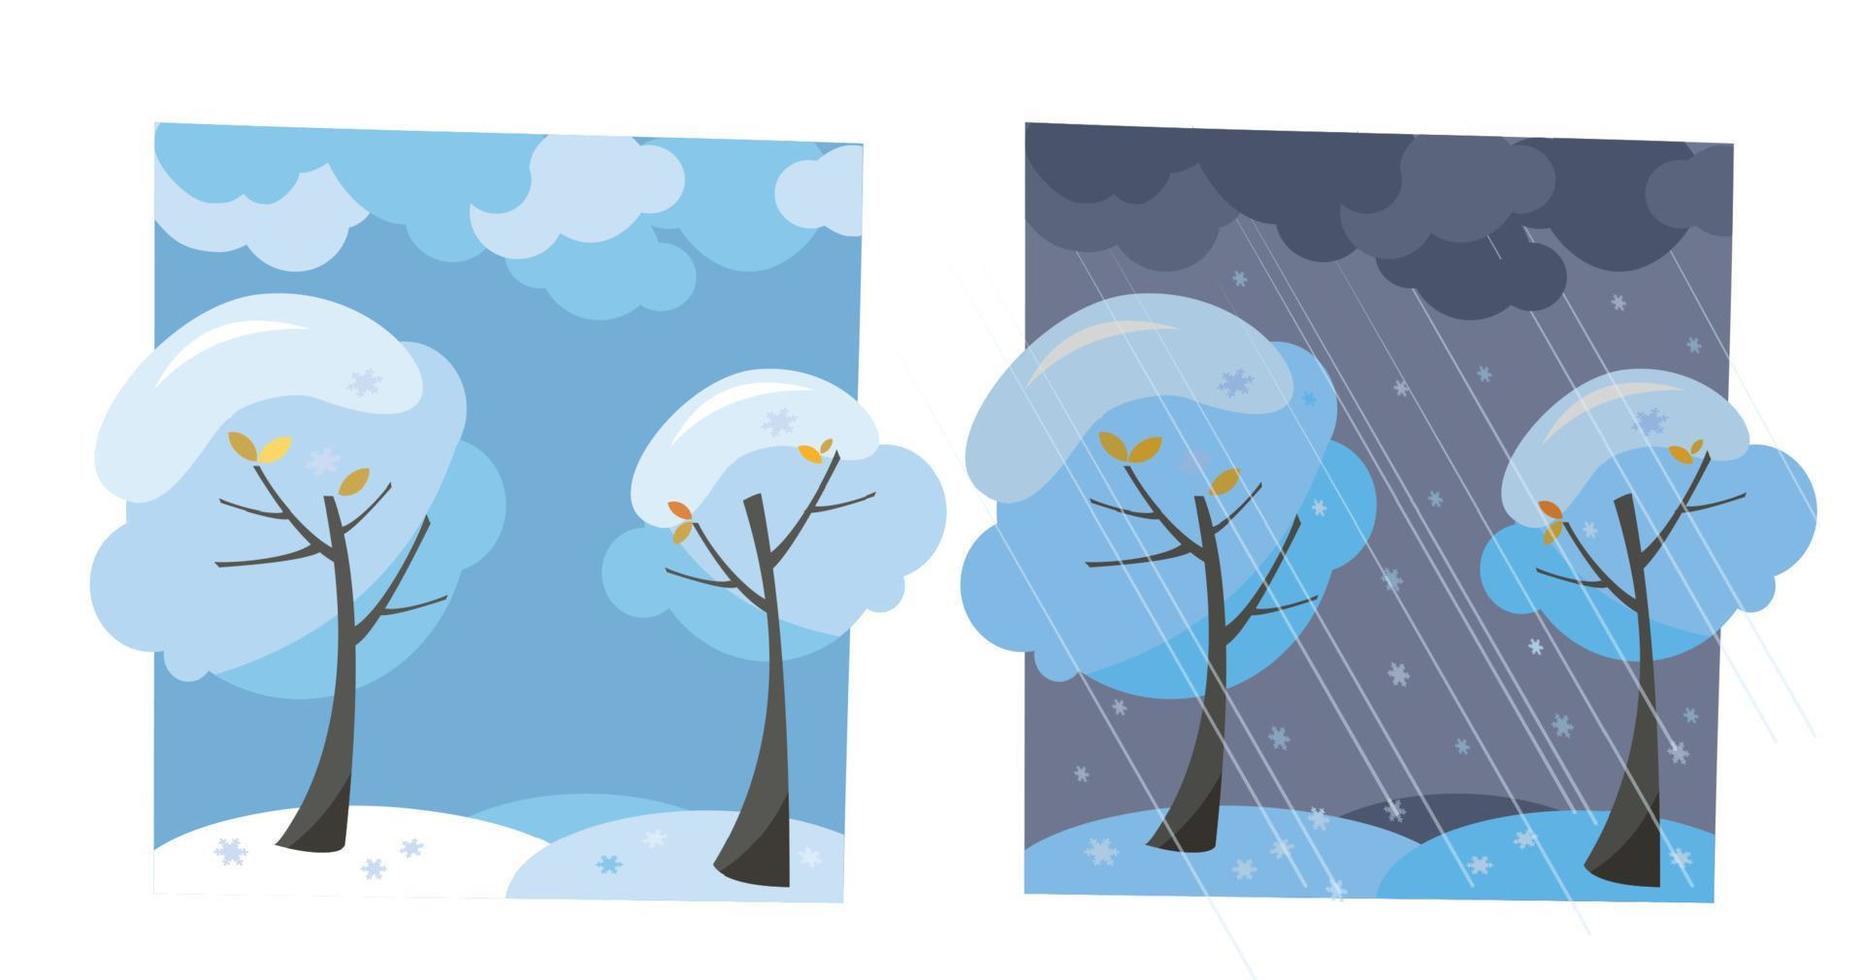 Winter snow trees with flying snowflakes. Set of two non-parallel pictures with a view of good sunny weather and dark evening. Flat cartoon vector illustration. Trees with round crown under clouds sky